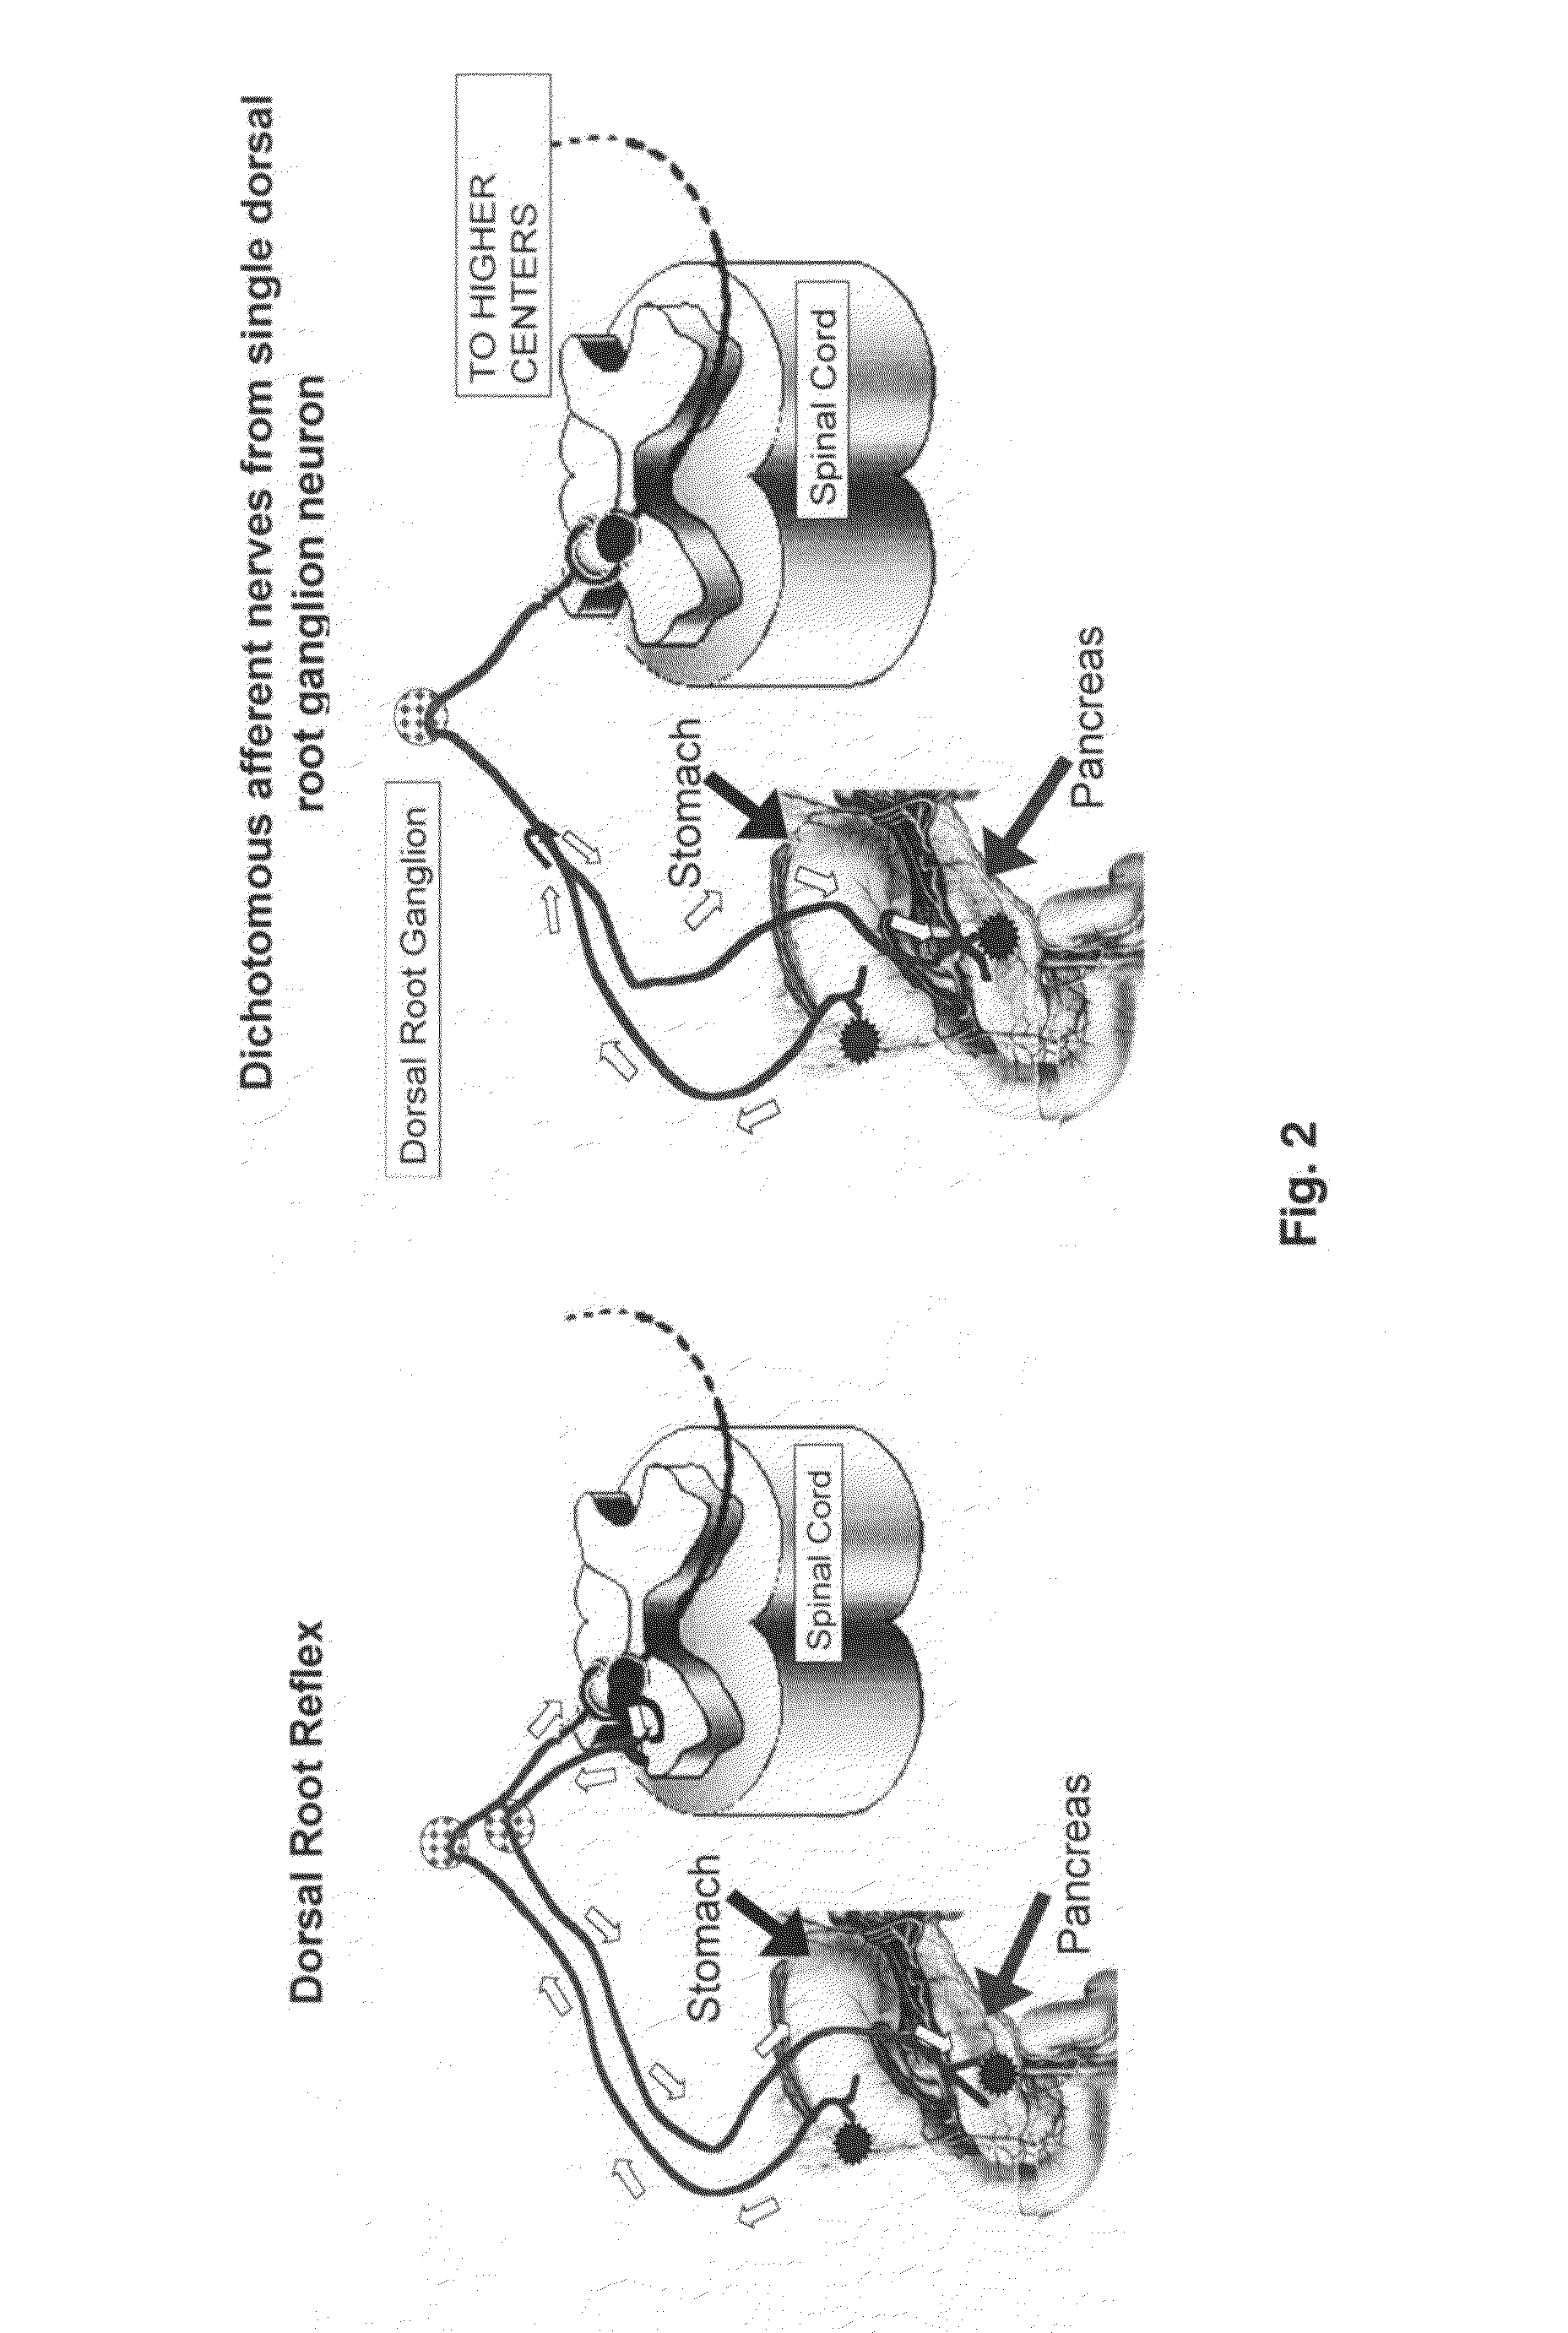 Modulation of nerve pain activity by resiniferatoxin and uses thereof